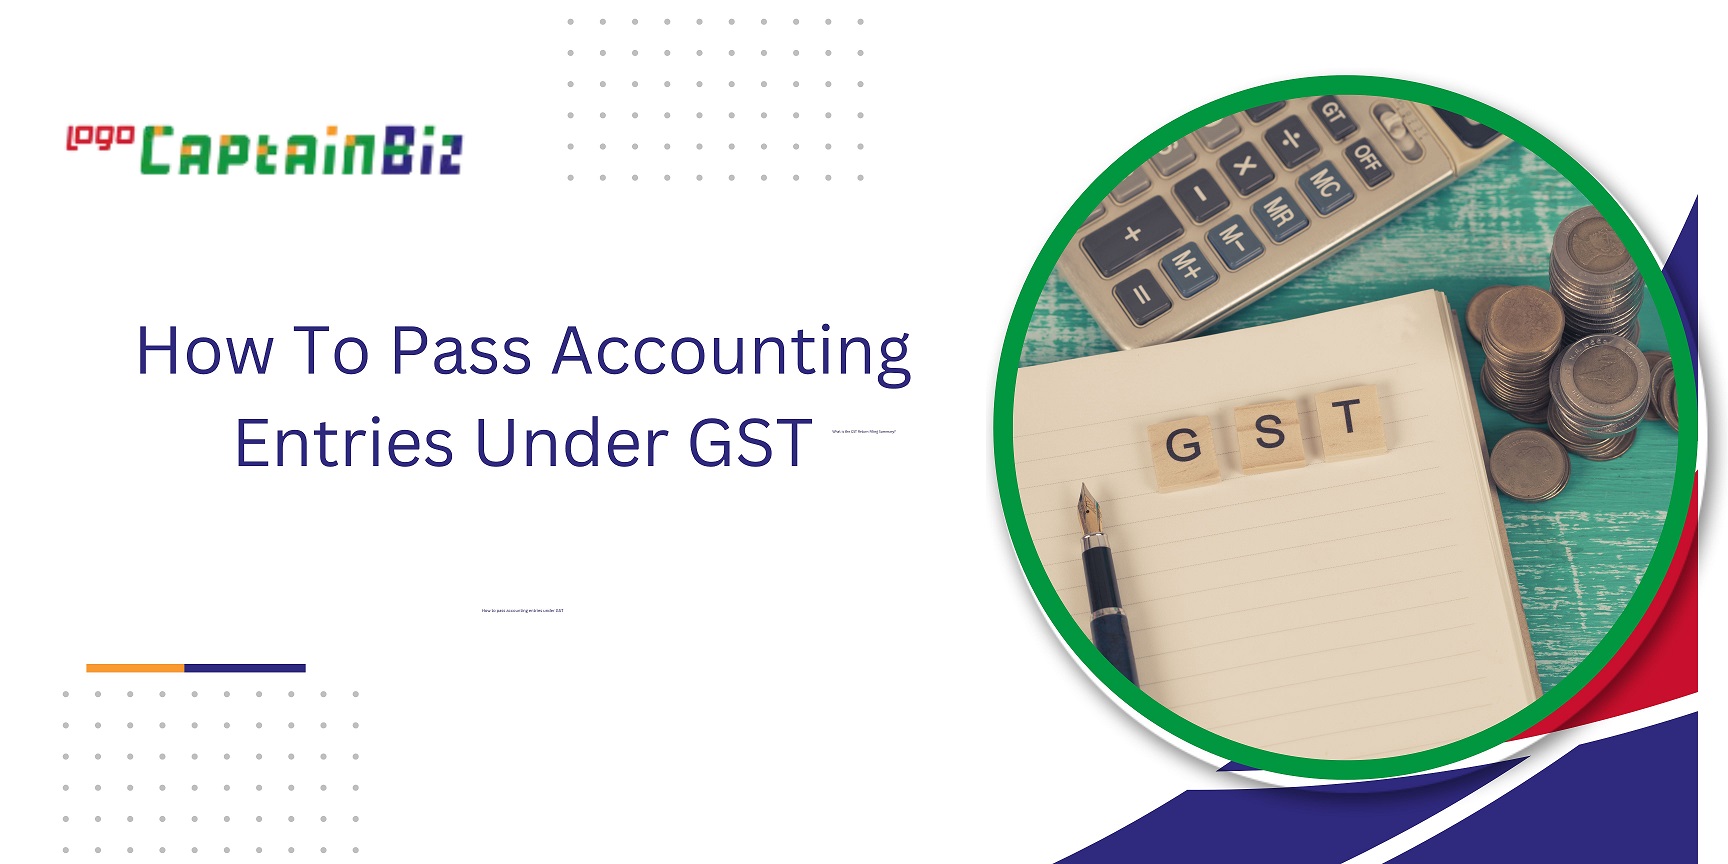 CaptainBiz: how to pass accounting entries under gst